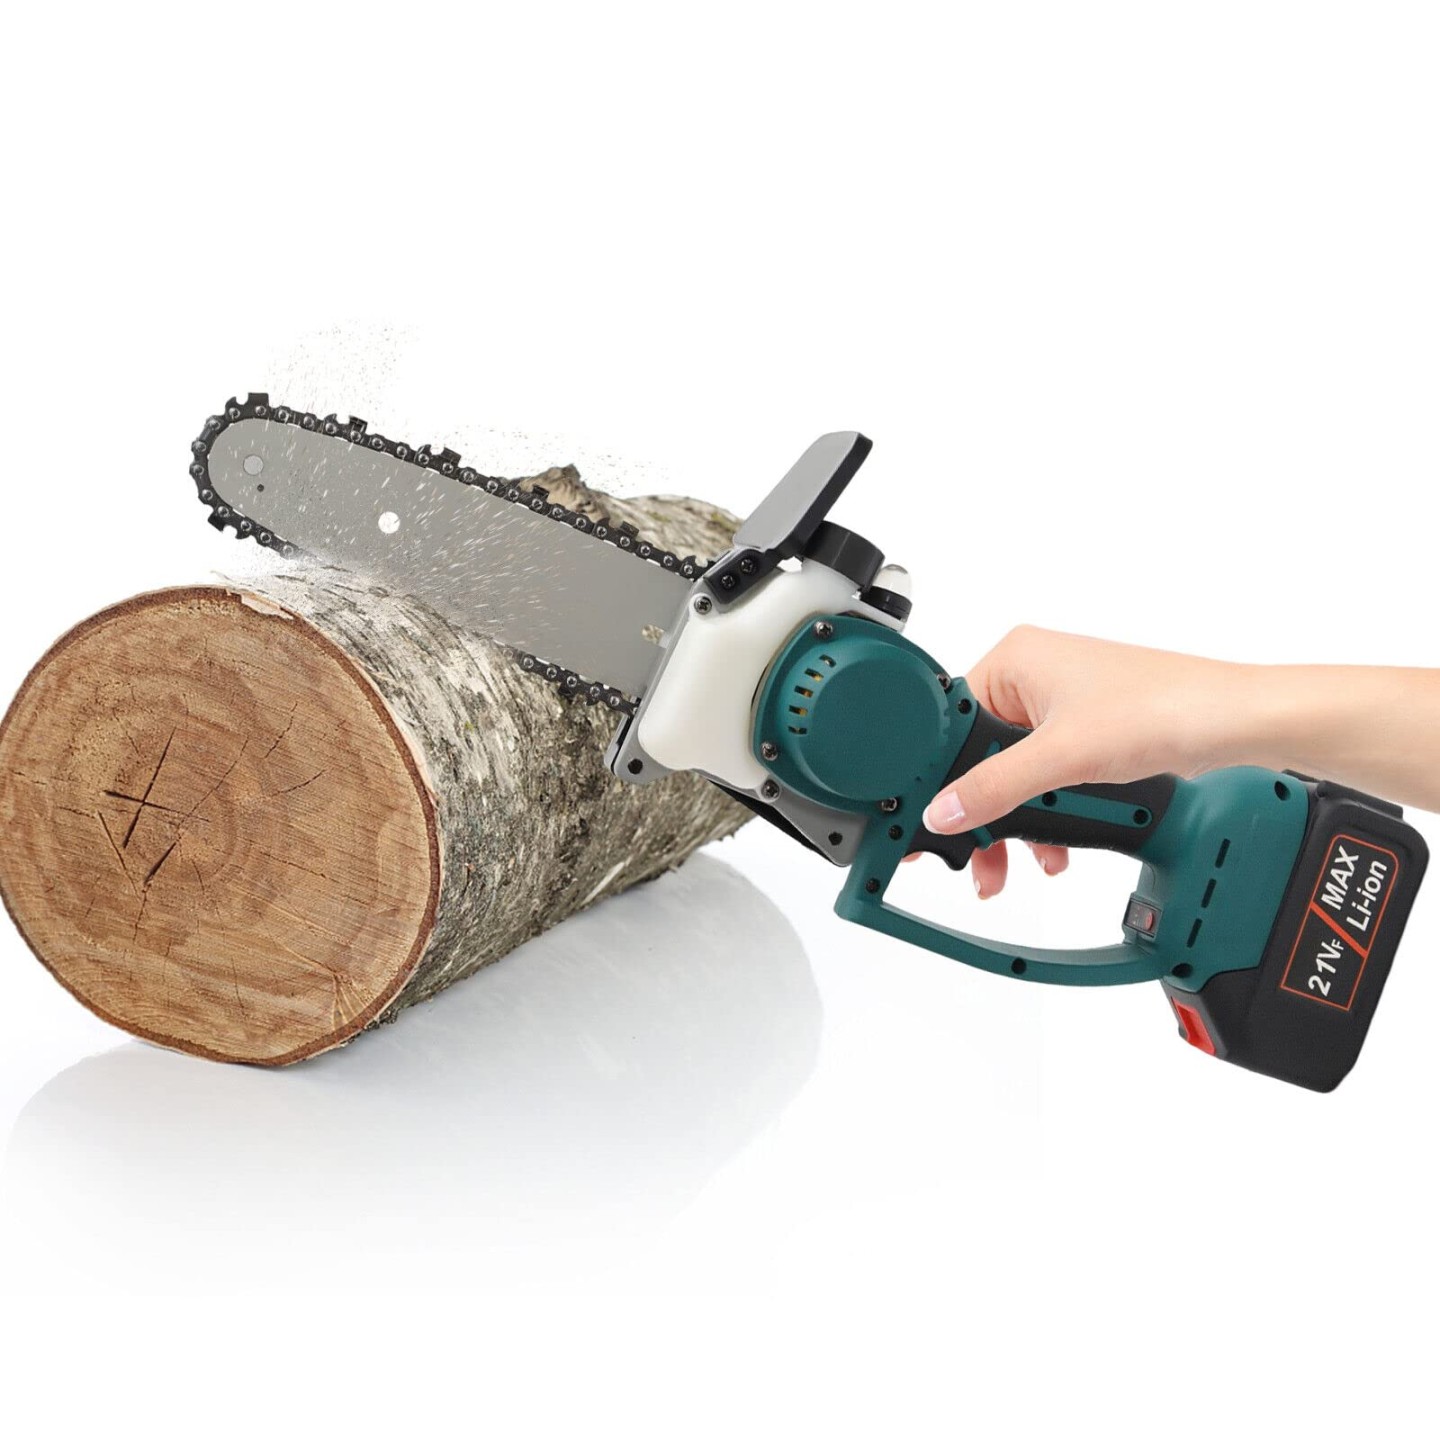 inch-mini-cordless-chainsaw-chainsaw-pruning-saw-electric-saw Electric Saw For Trees Review: Cut Through The Branches With Confidence picture